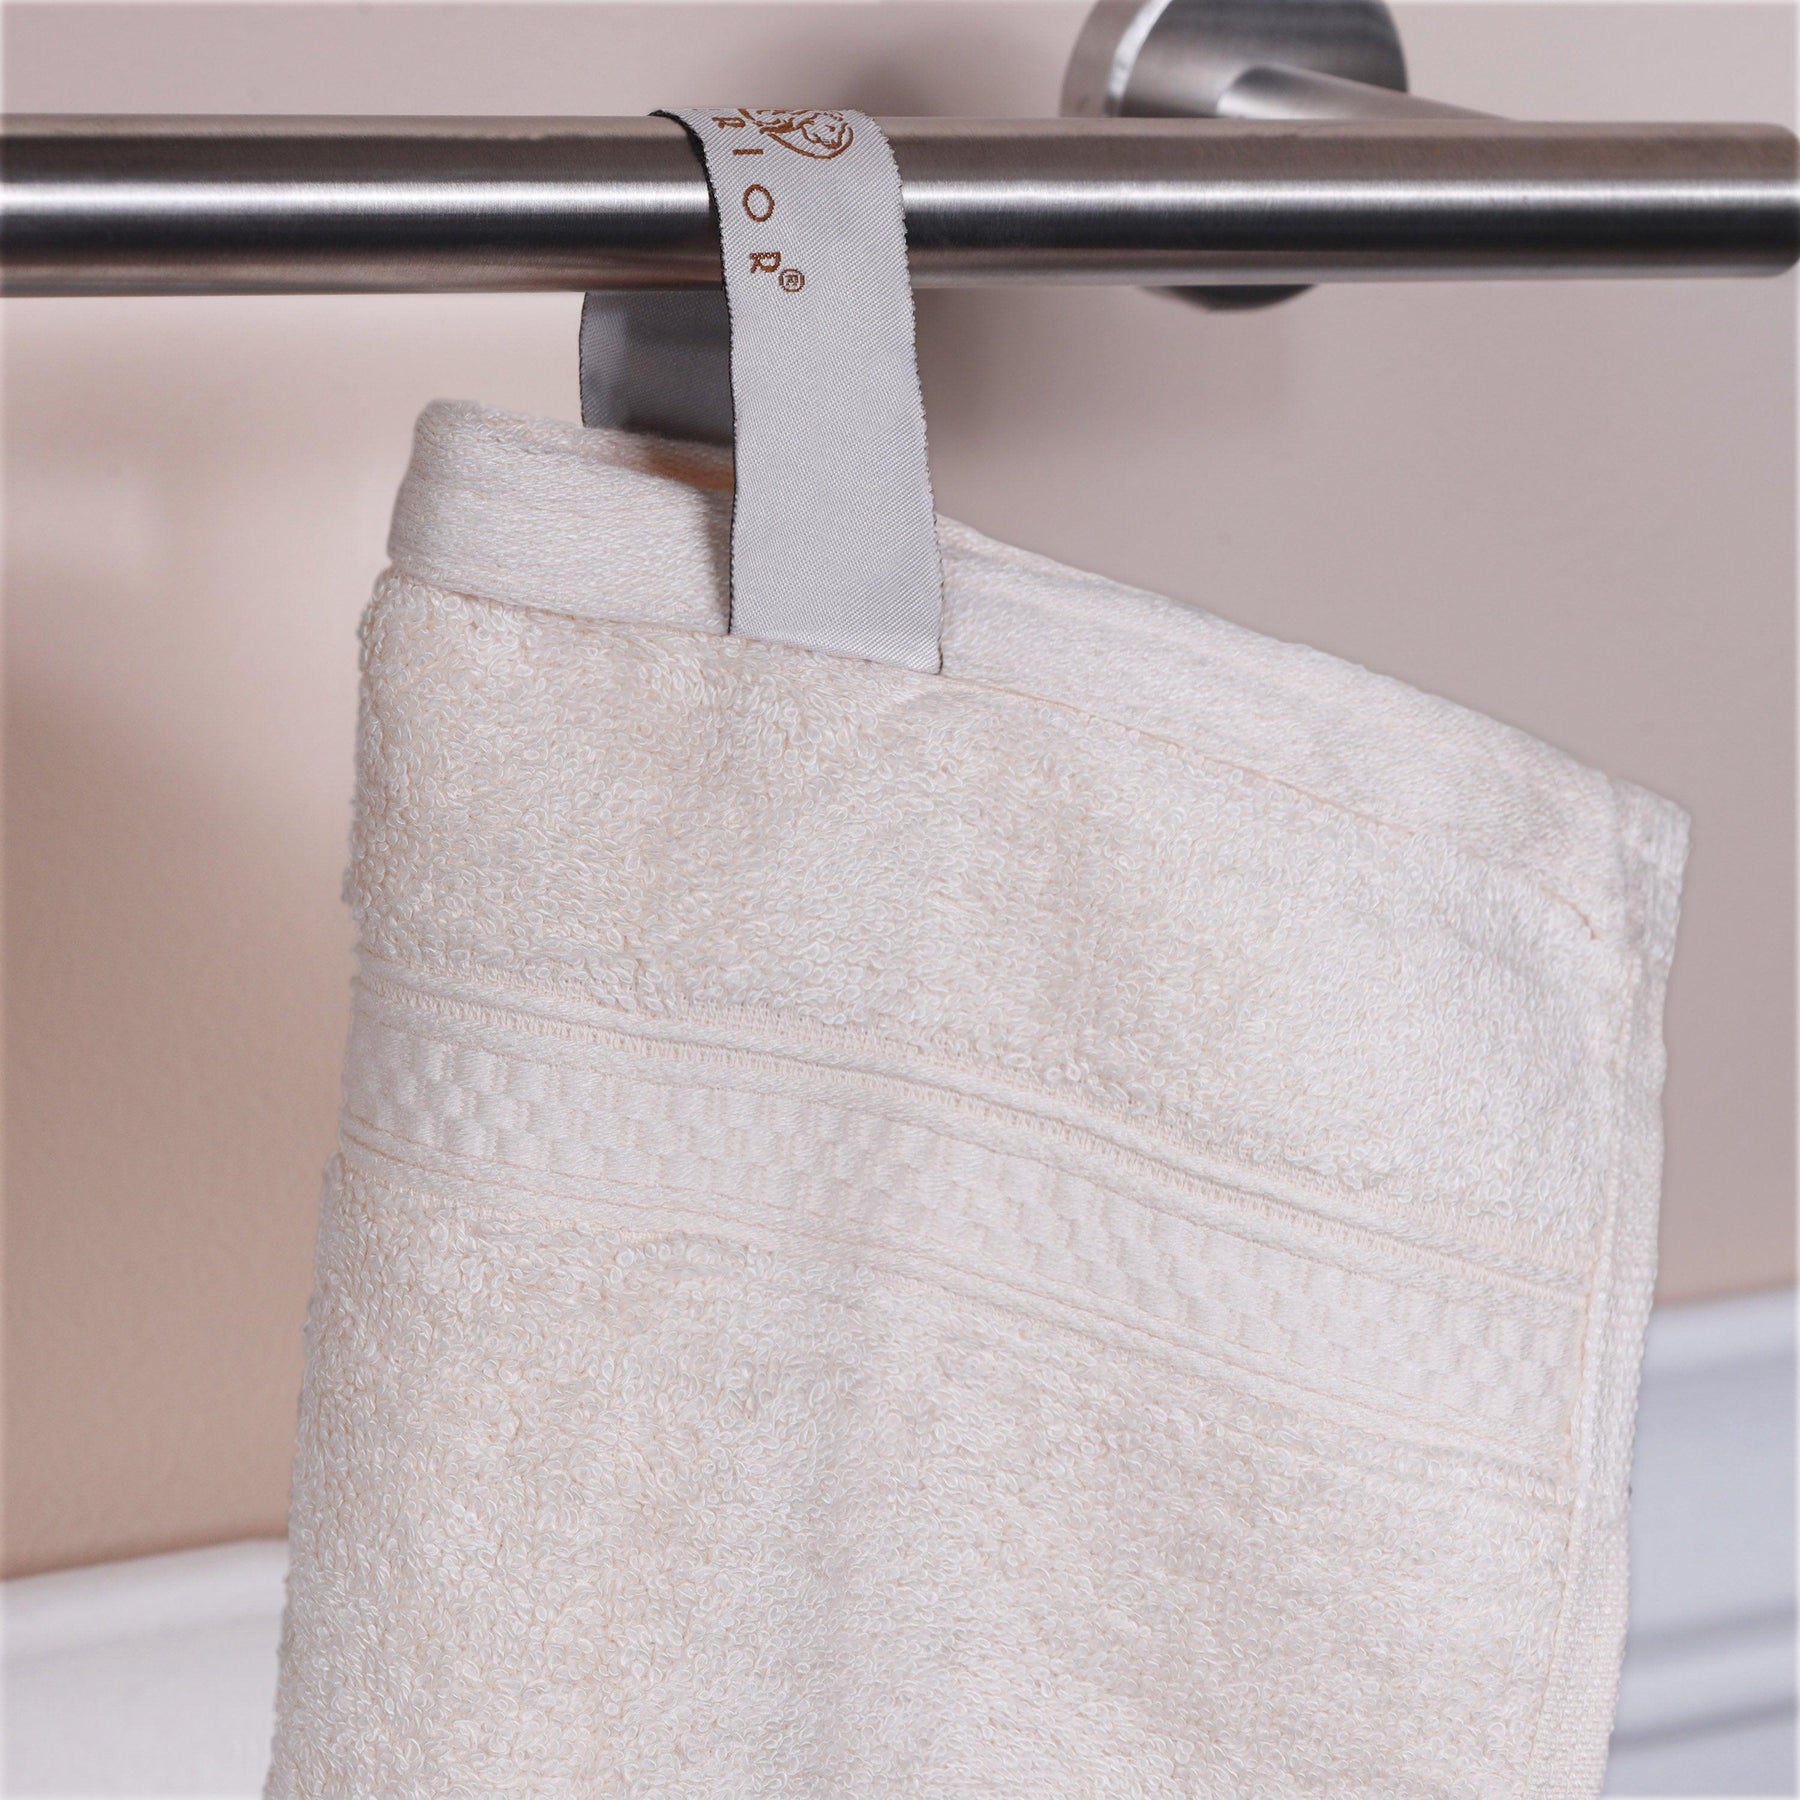  Ultra-Soft Hypoallergenic Rayon from Bamboo Cotton Blend Assorted Bath Towel Set - Ivory